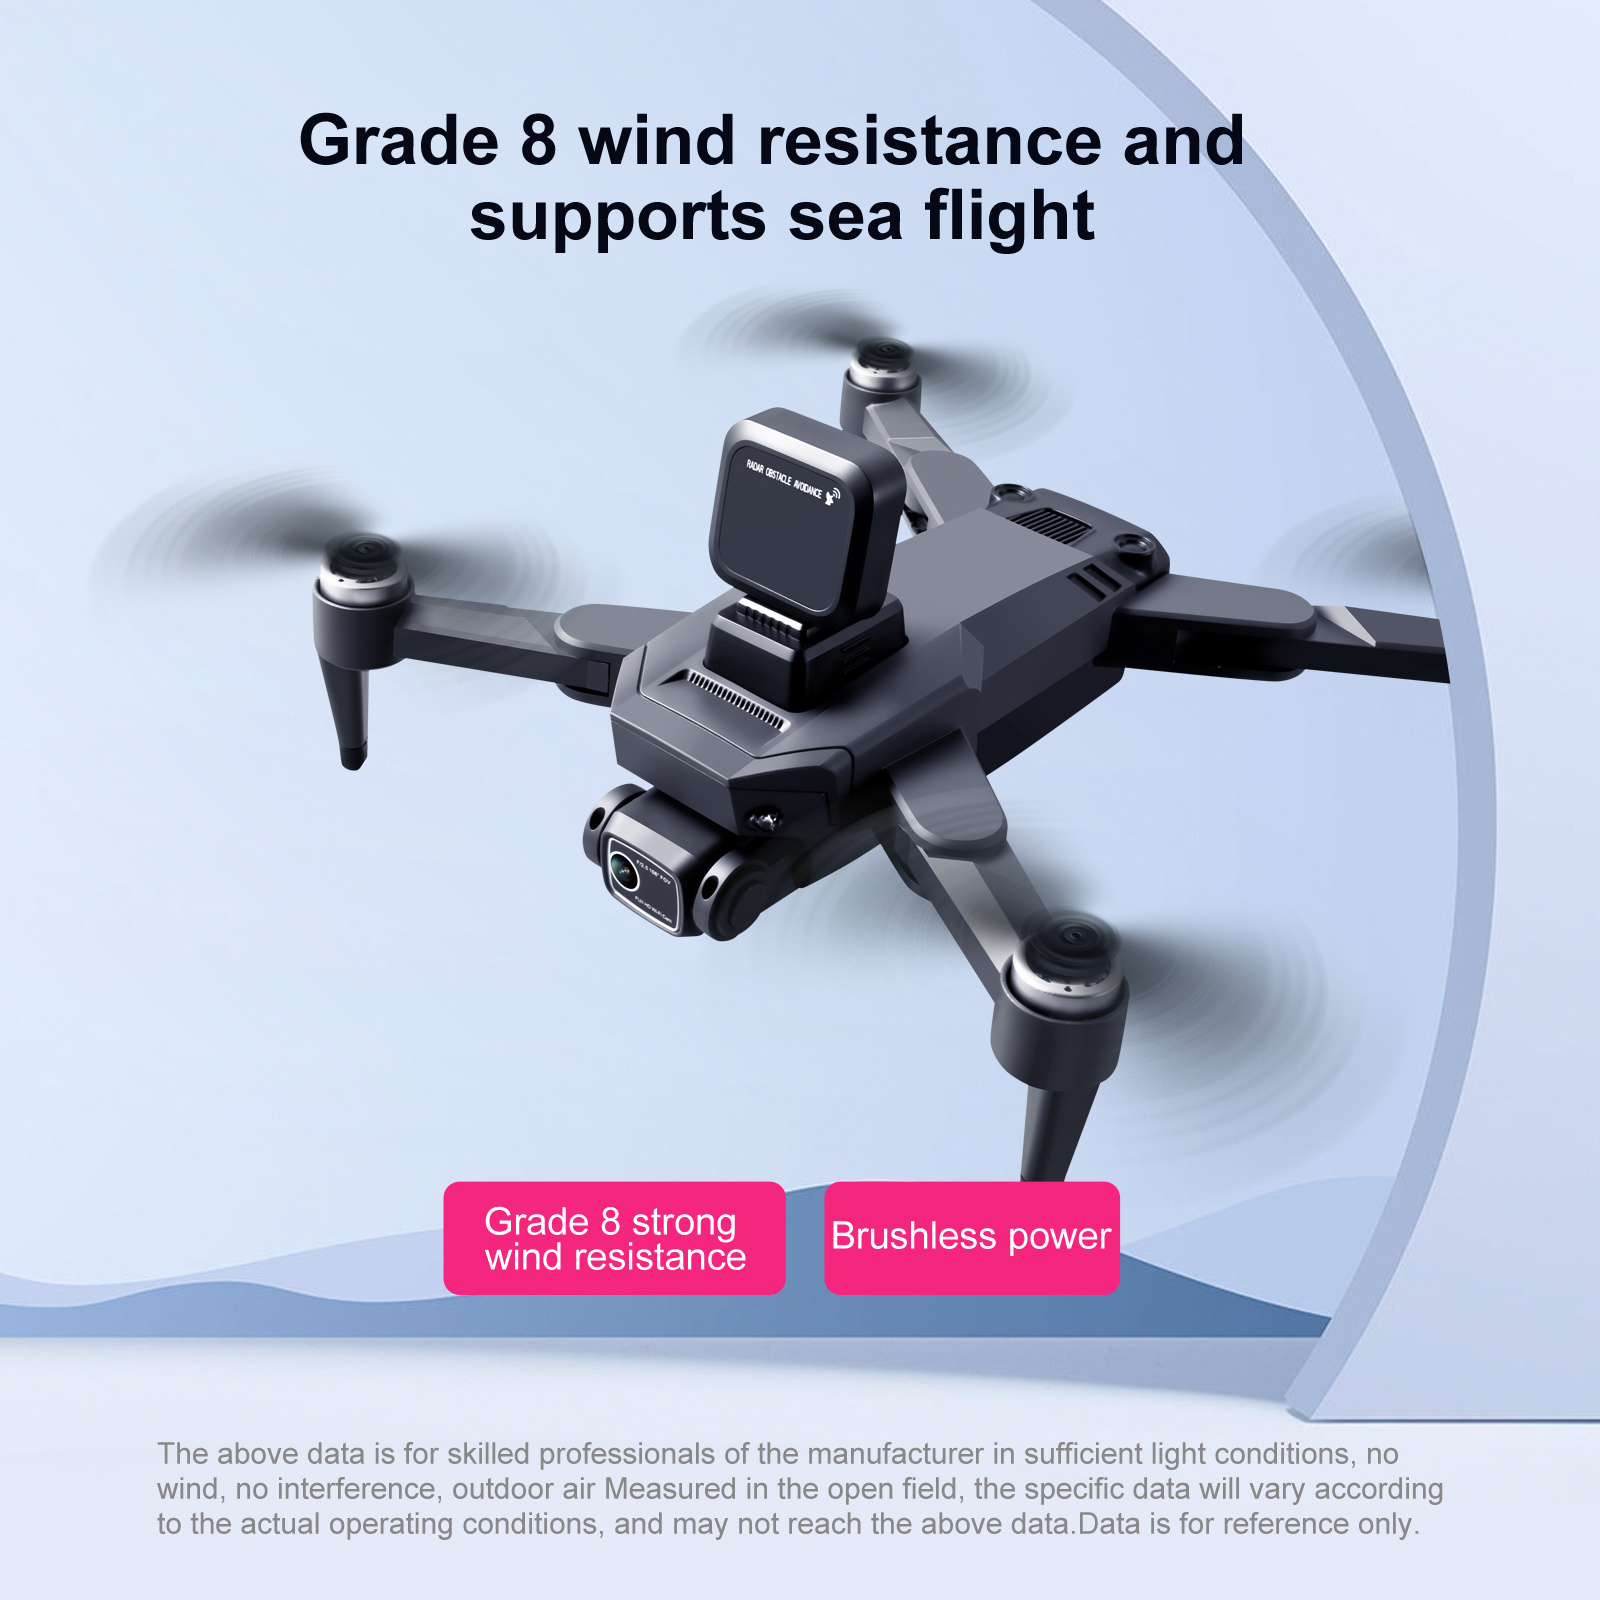 kxmg new s109 drone gps hd professional hd camera obstacle avoidance aerial photography brushless foldable quadcopter 100m rc drone toy uav details 10